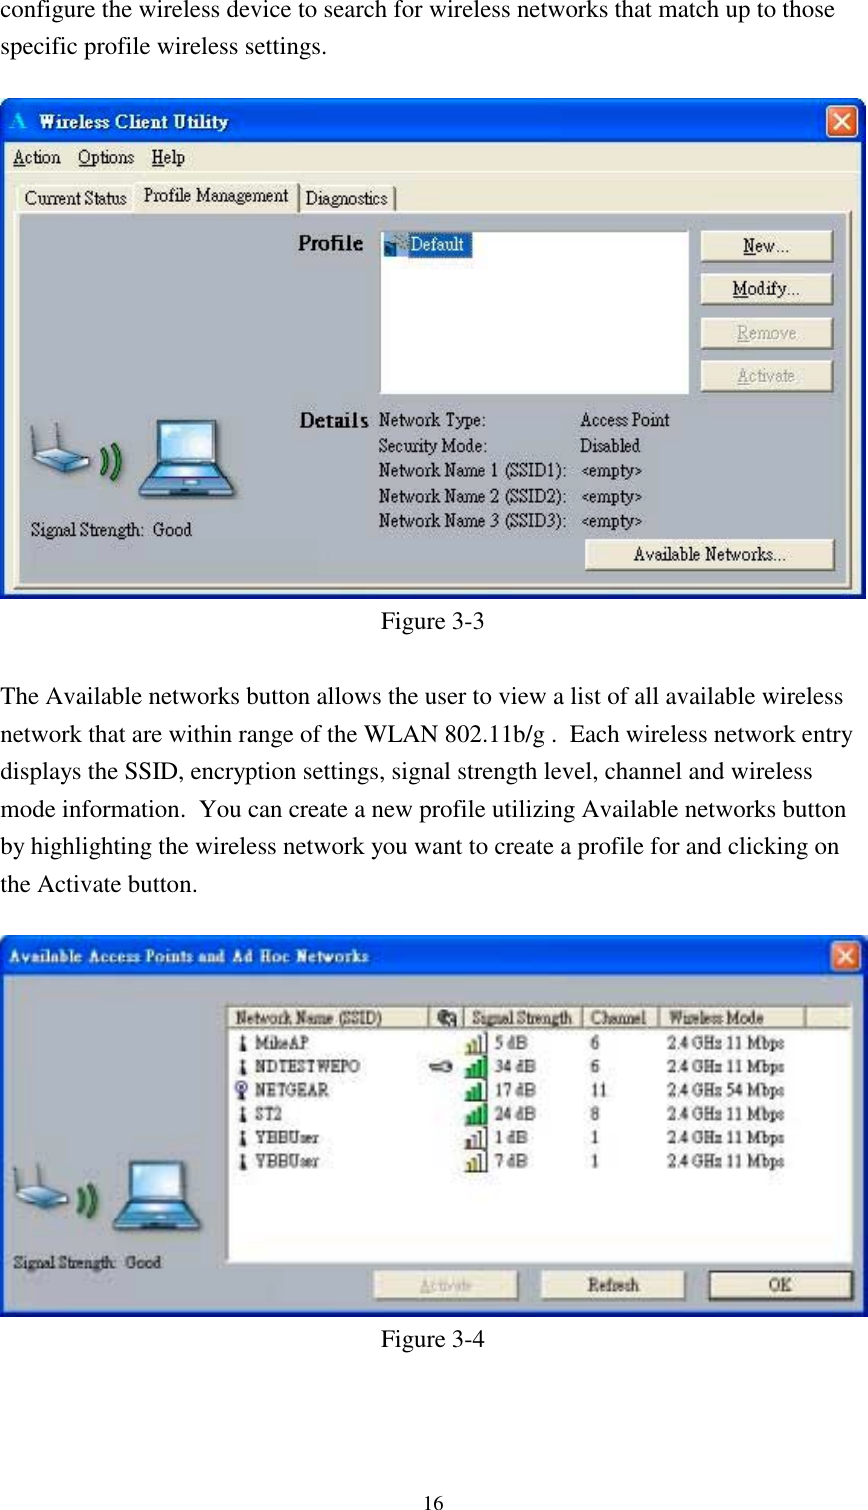 16configure the wireless device to search for wireless networks that match up to thosespecific profile wireless settings.Figure 3-3The Available networks button allows the user to view a list of all available wirelessnetwork that are within range of the WLAN 802.11b/g .  Each wireless network entrydisplays the SSID, encryption settings, signal strength level, channel and wirelessmode information.  You can create a new profile utilizing Available networks buttonby highlighting the wireless network you want to create a profile for and clicking onthe Activate button.Figure 3-4